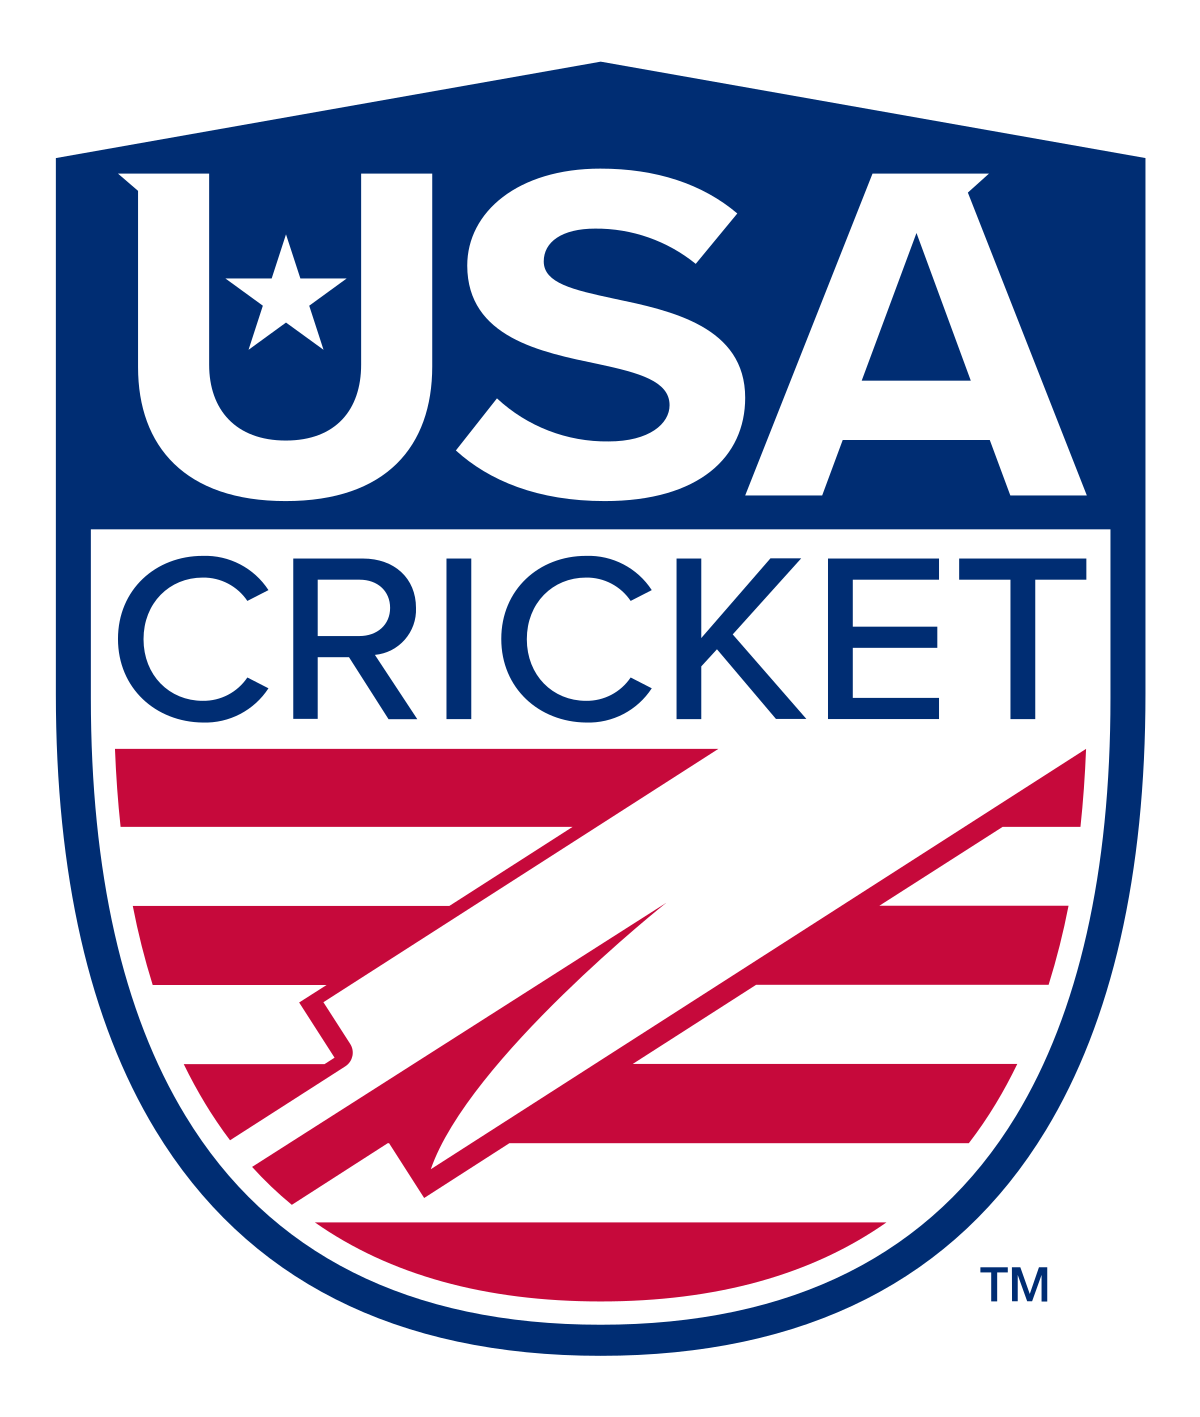 USA cricket will have access to many USOPC benefits after receiving USOPC recognition at a time the sport is bidding for inclusion on the Olympic programme at Los Angeles 2028 ©USA Cricket